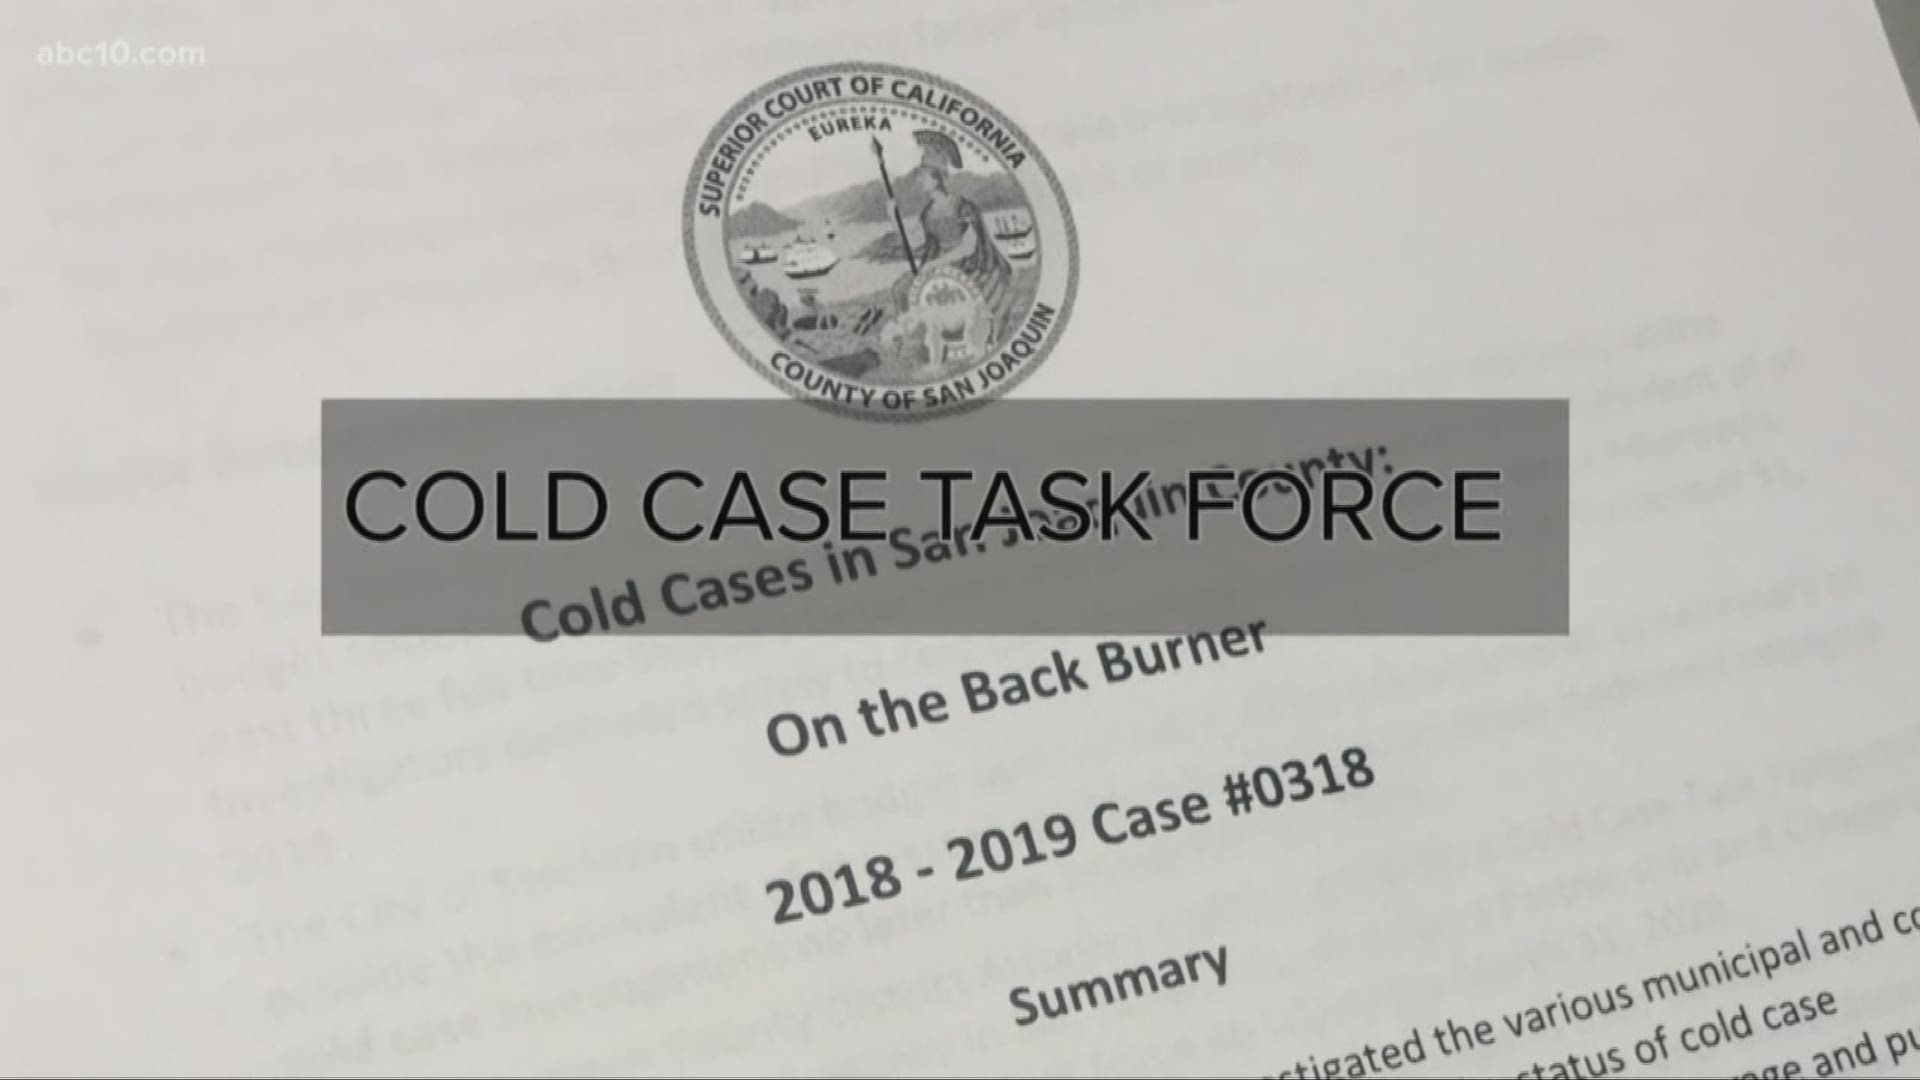 There are more than 500 cold cases in San Joaquin County and, to help with the number of cases, the Grand Jury is recommending law enforcement to hire more detectives to find answers.